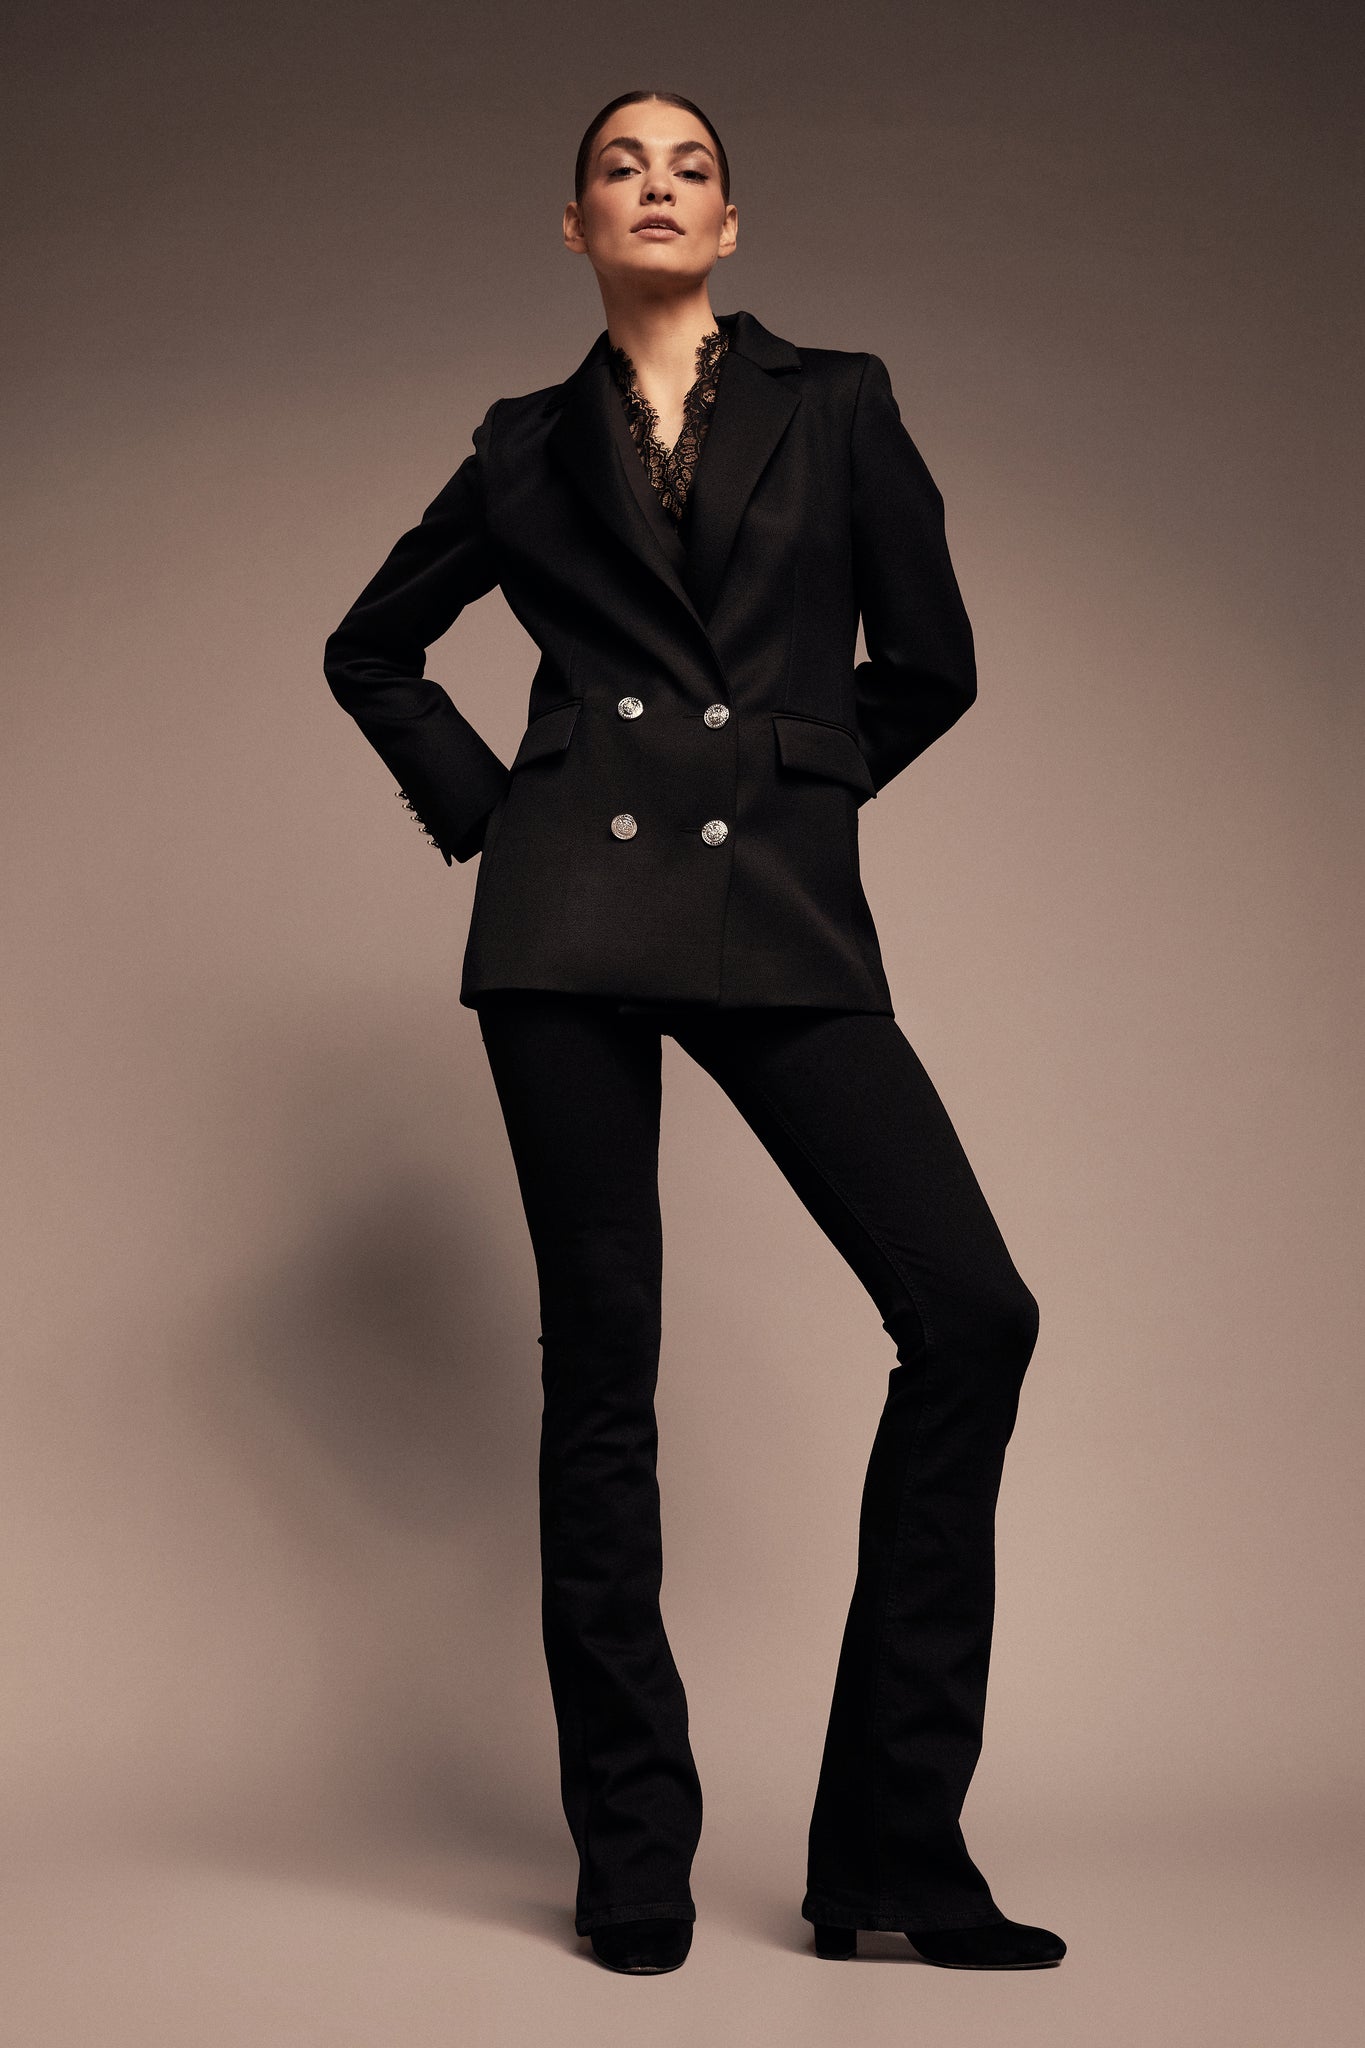 jubilee edition of double breasted wool blazer in black with two hip pockets and silver button details down front and on cuffs and handmade in the uk worn with black flared jeans and black ankle boots